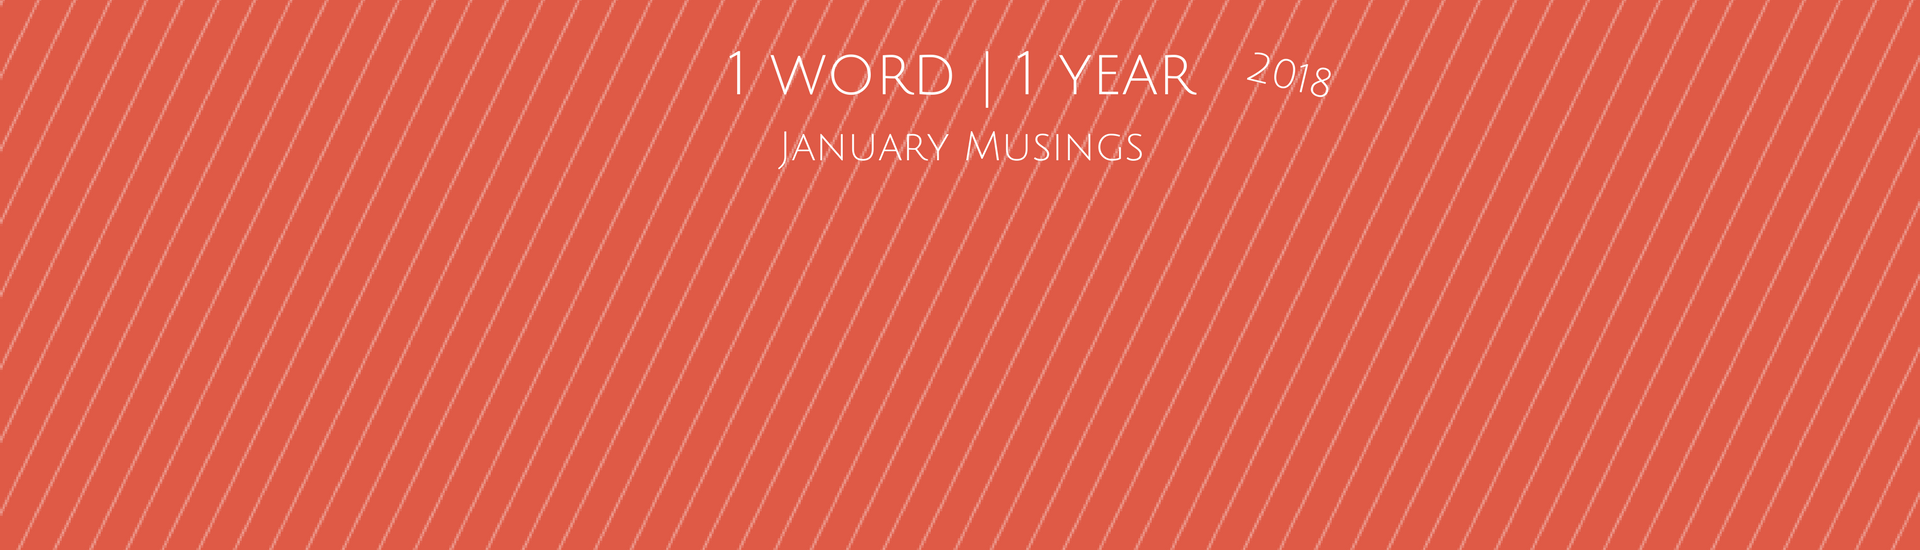 1 word for 1 year 2018. January musings on finding freedom through grace.